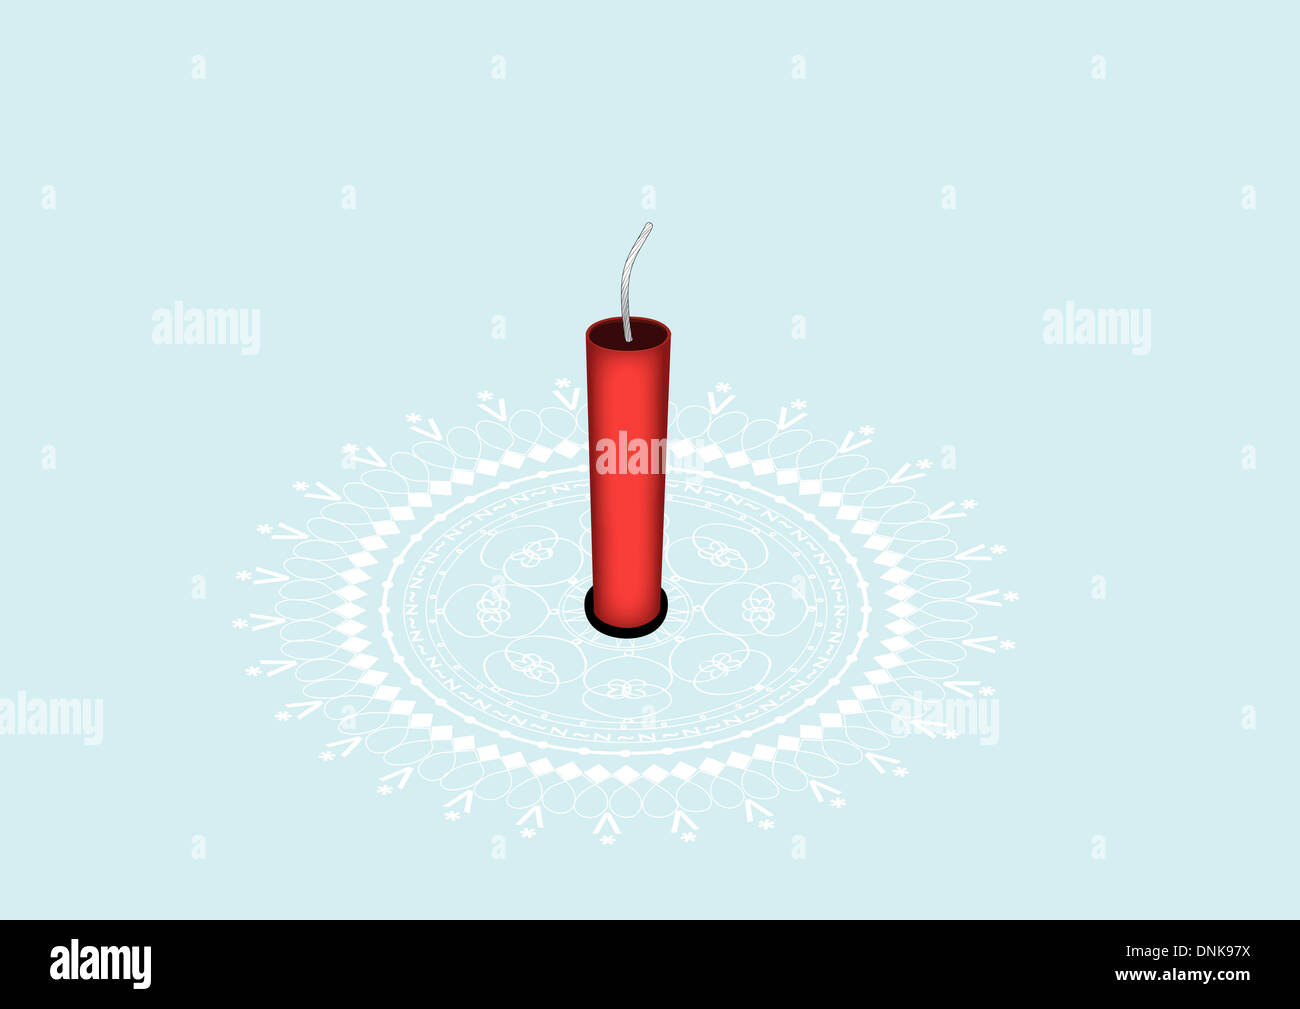 Diwali firecracker isolated on colored background Stock Photo